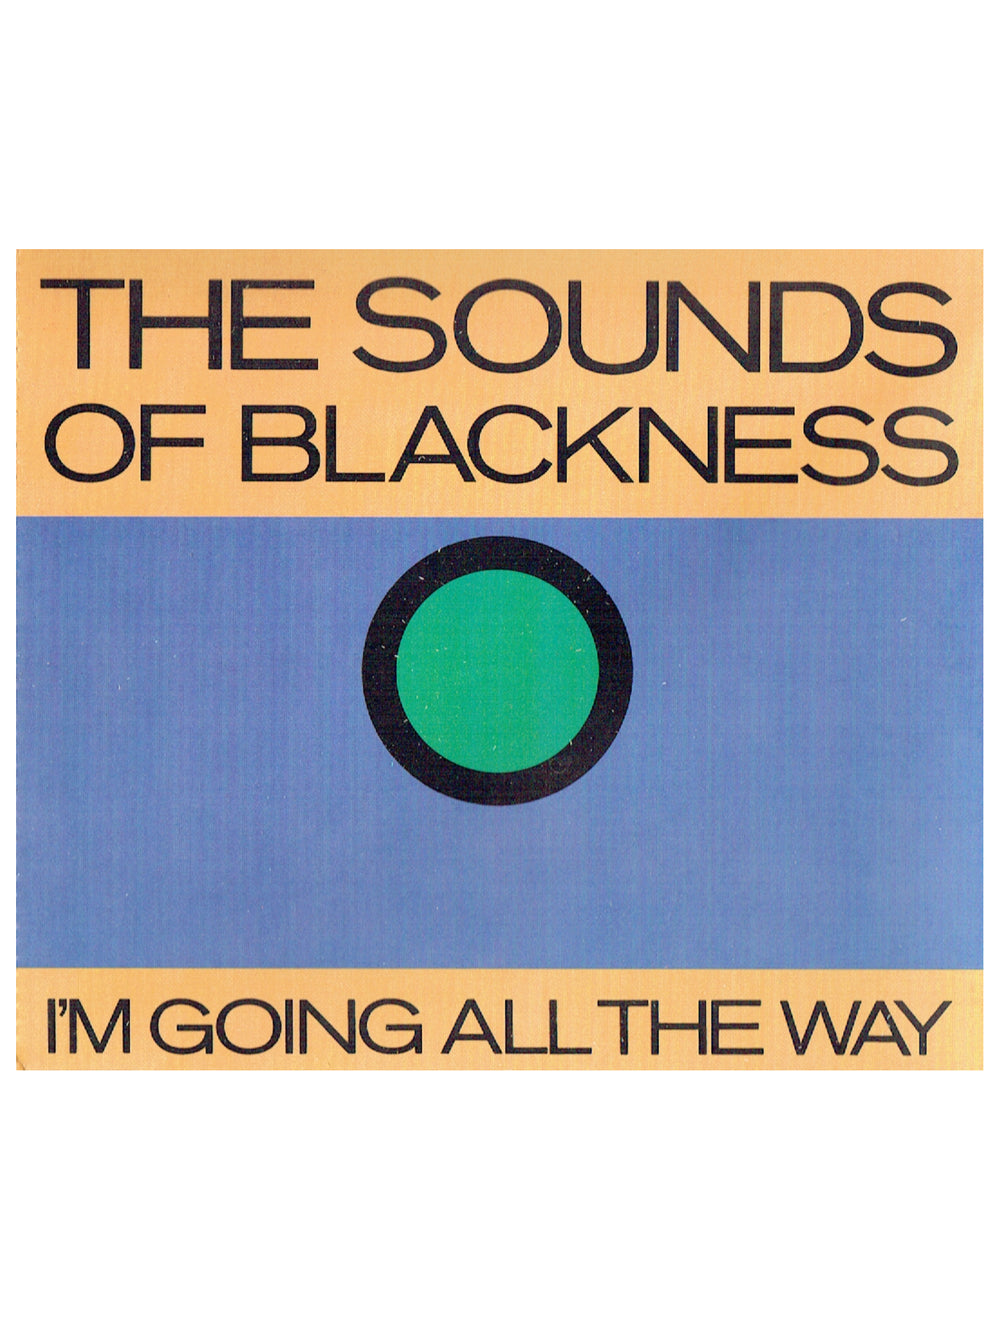 Prince – Sounds Of Blackness I'm Going All The Way CD Single 1993 UK Release Prince Jam & Lewis